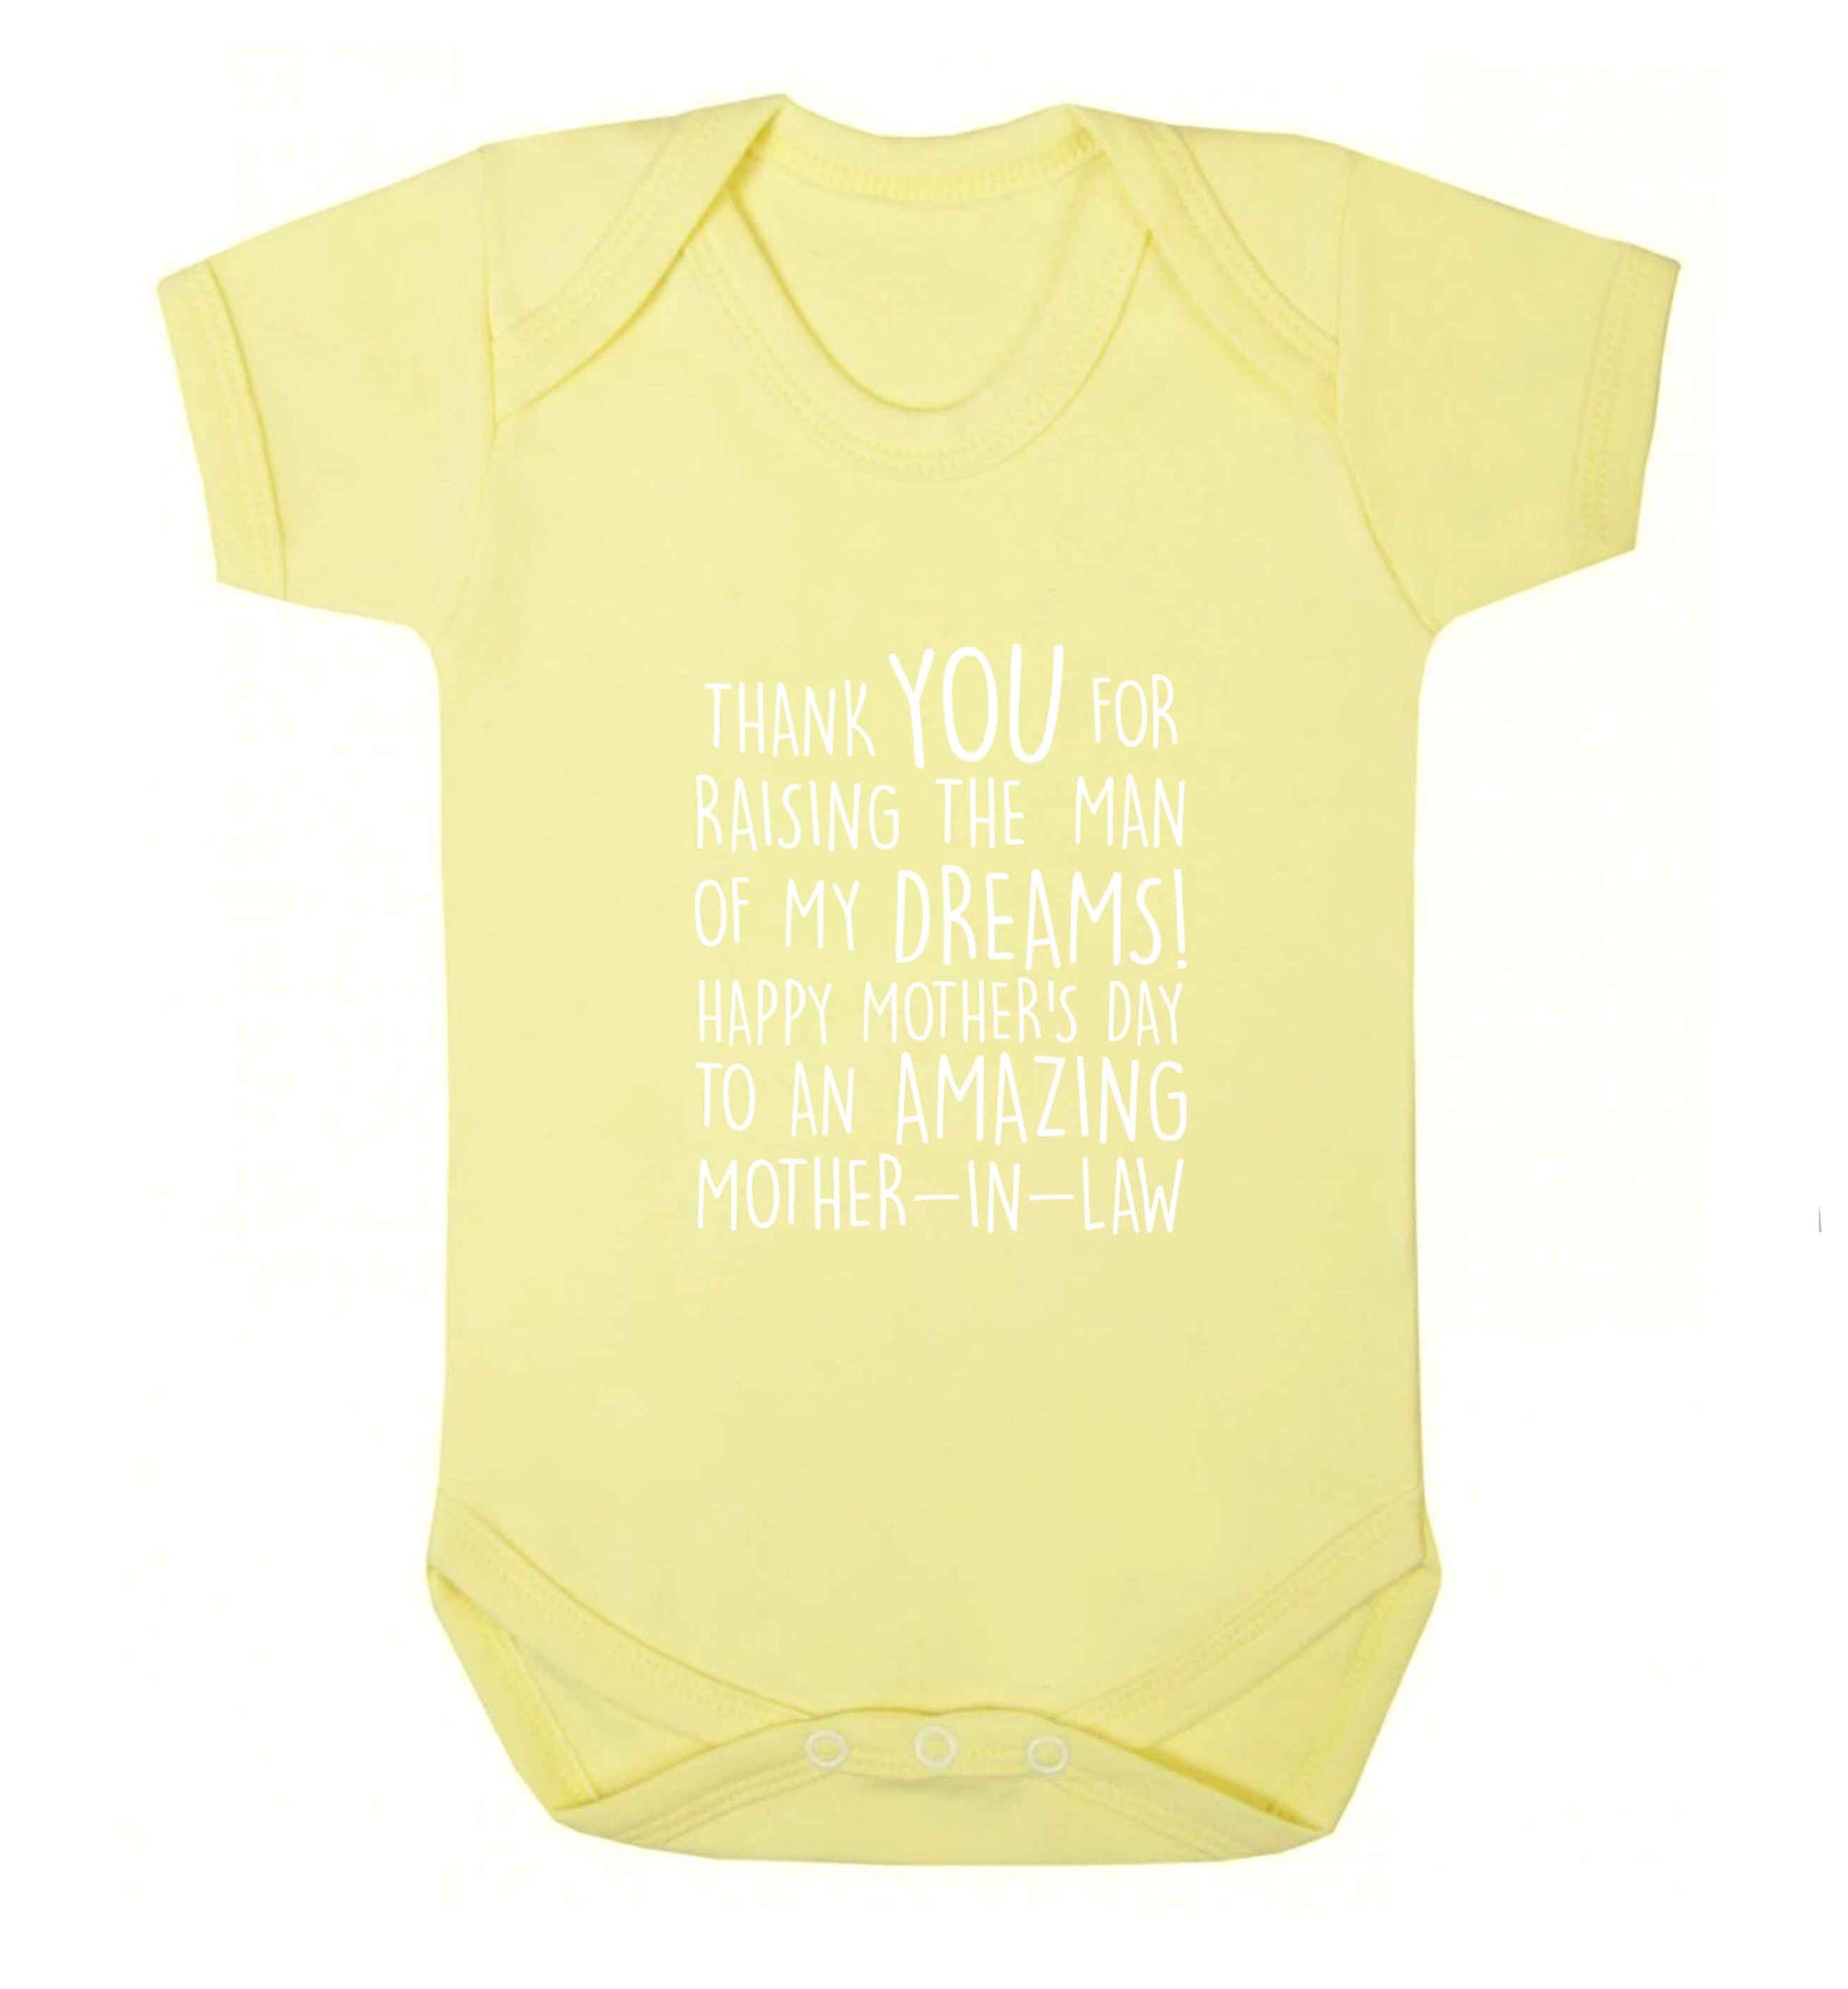 Raising the man of my dreams mother's day mother-in-law baby vest pale yellow 18-24 months